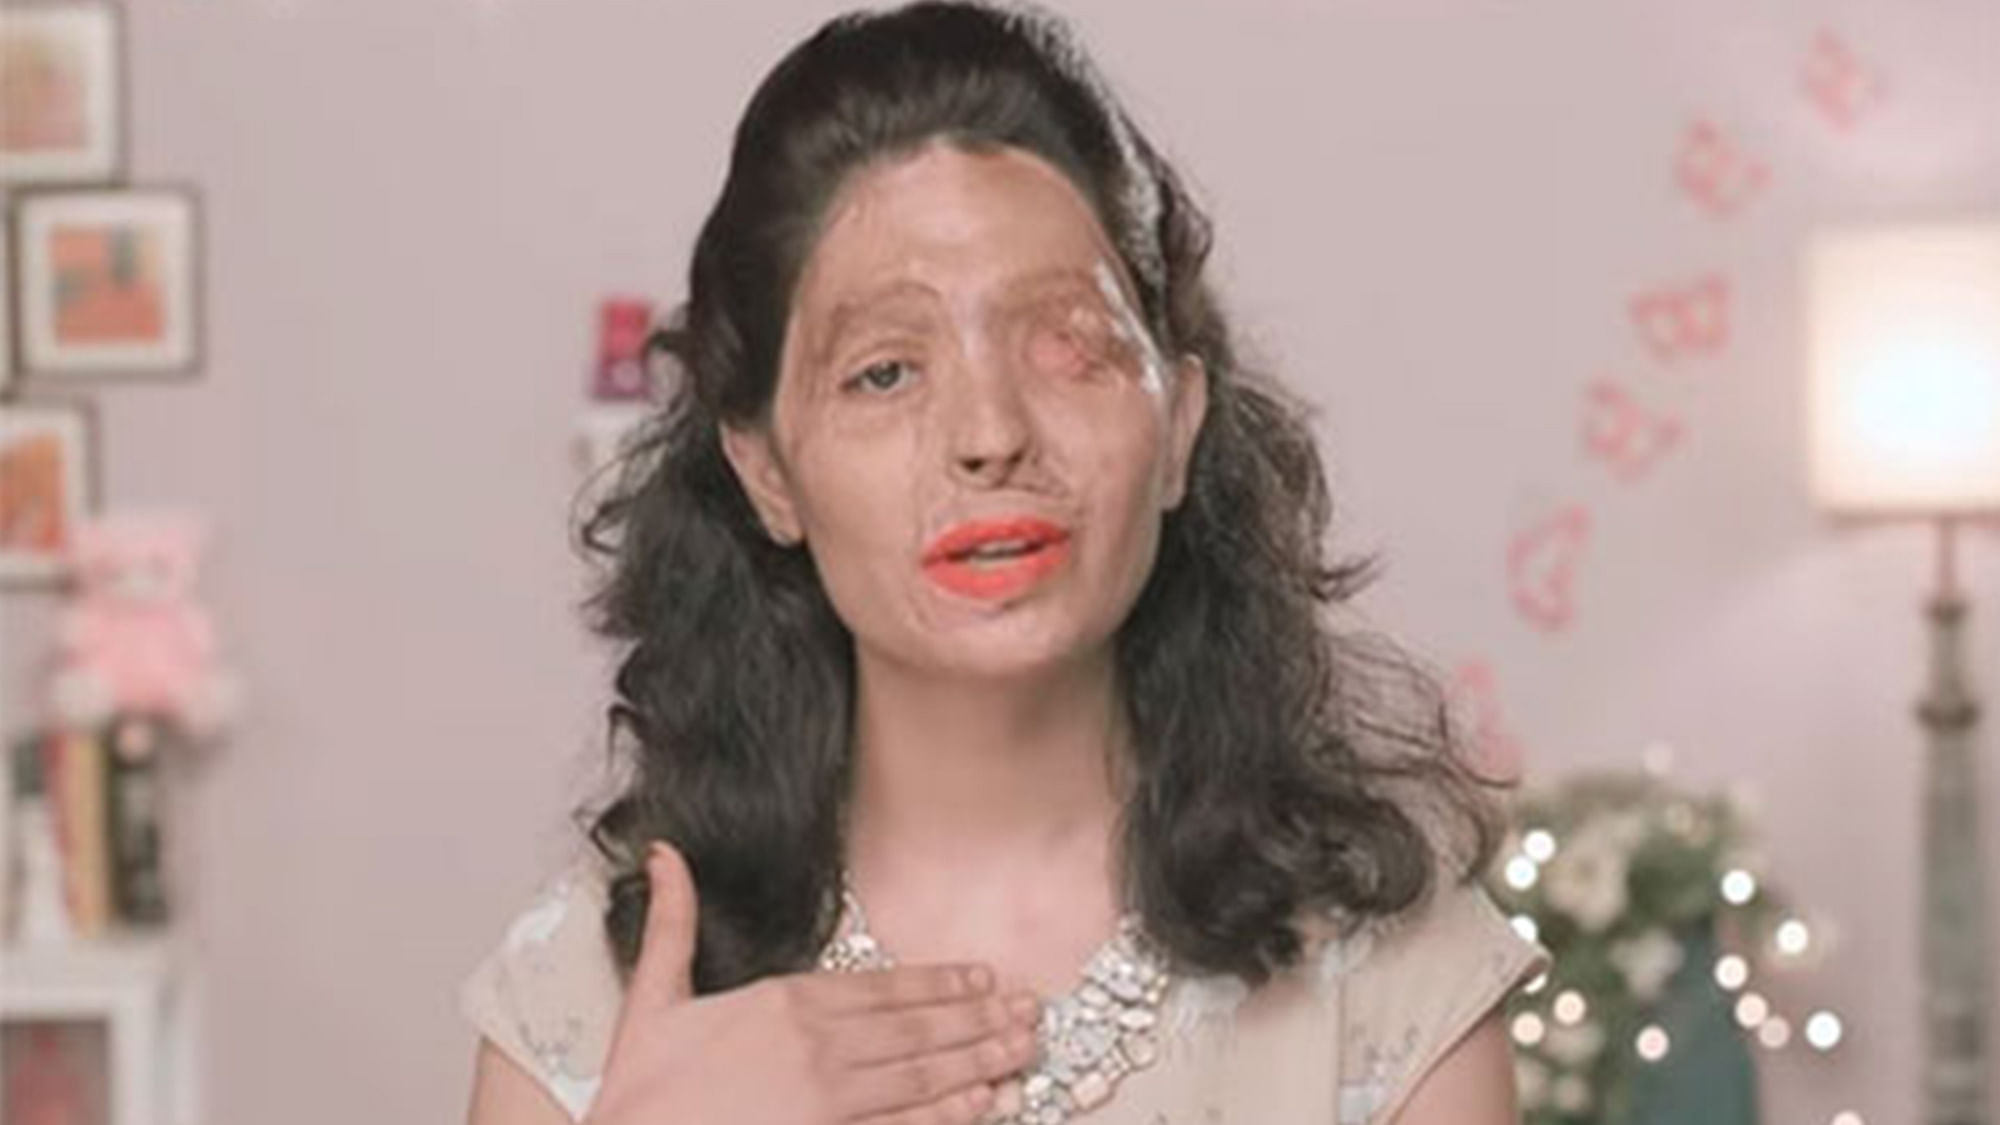 Fashion brand FTL Moda has asked acid attack victim Reshma Qureshi to walk the ramp for them at the New York Fashion Week in September. (Photo: Make Love Not Scars)